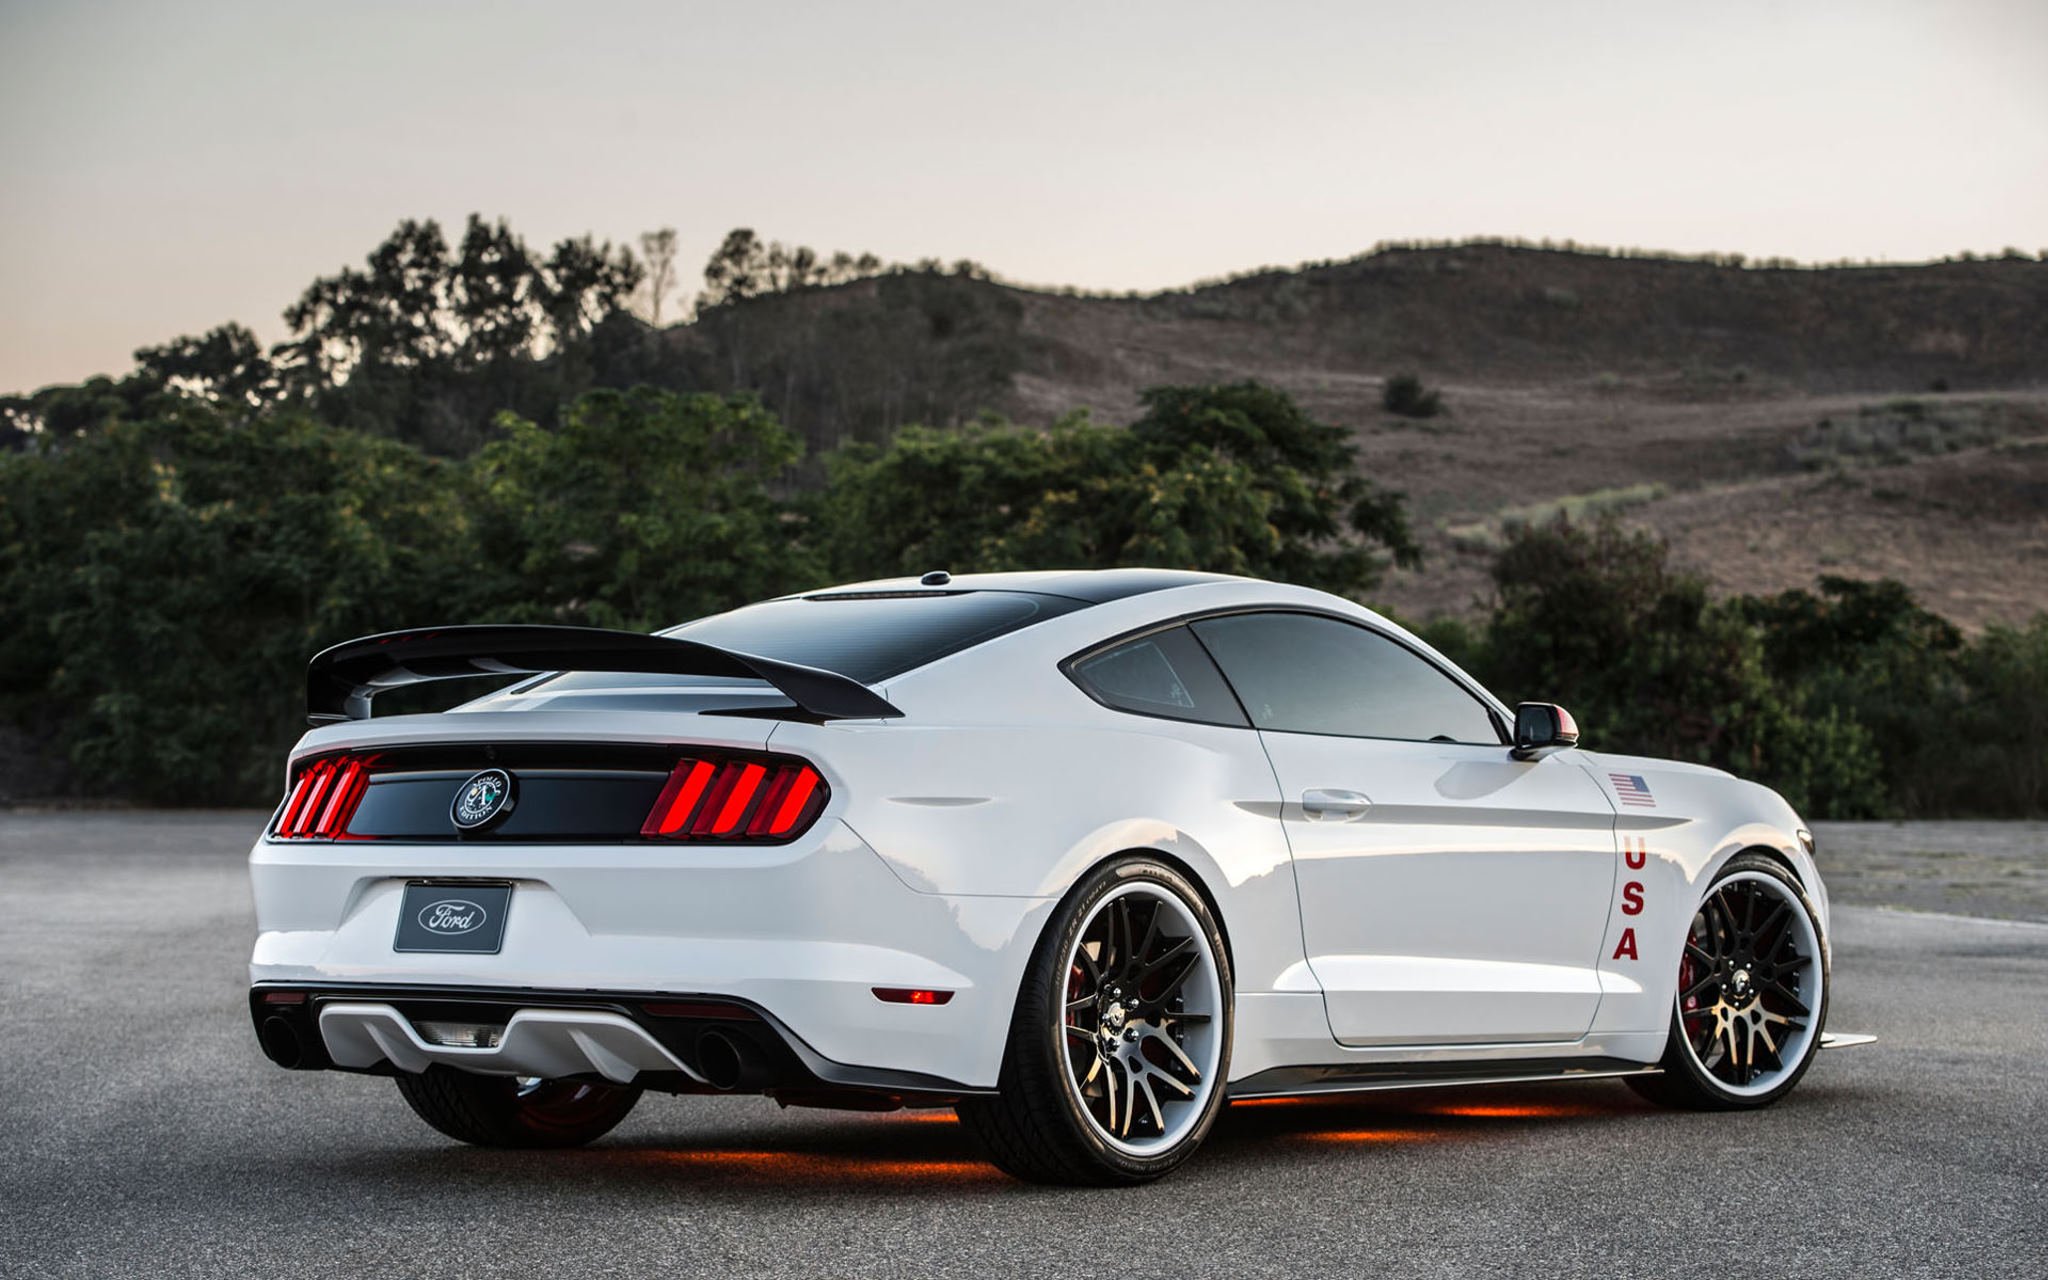 2015, Ford, Mustang, Gt, Apollo, Edition, Muscle, Supercar, Usa,  03 Wallpaper